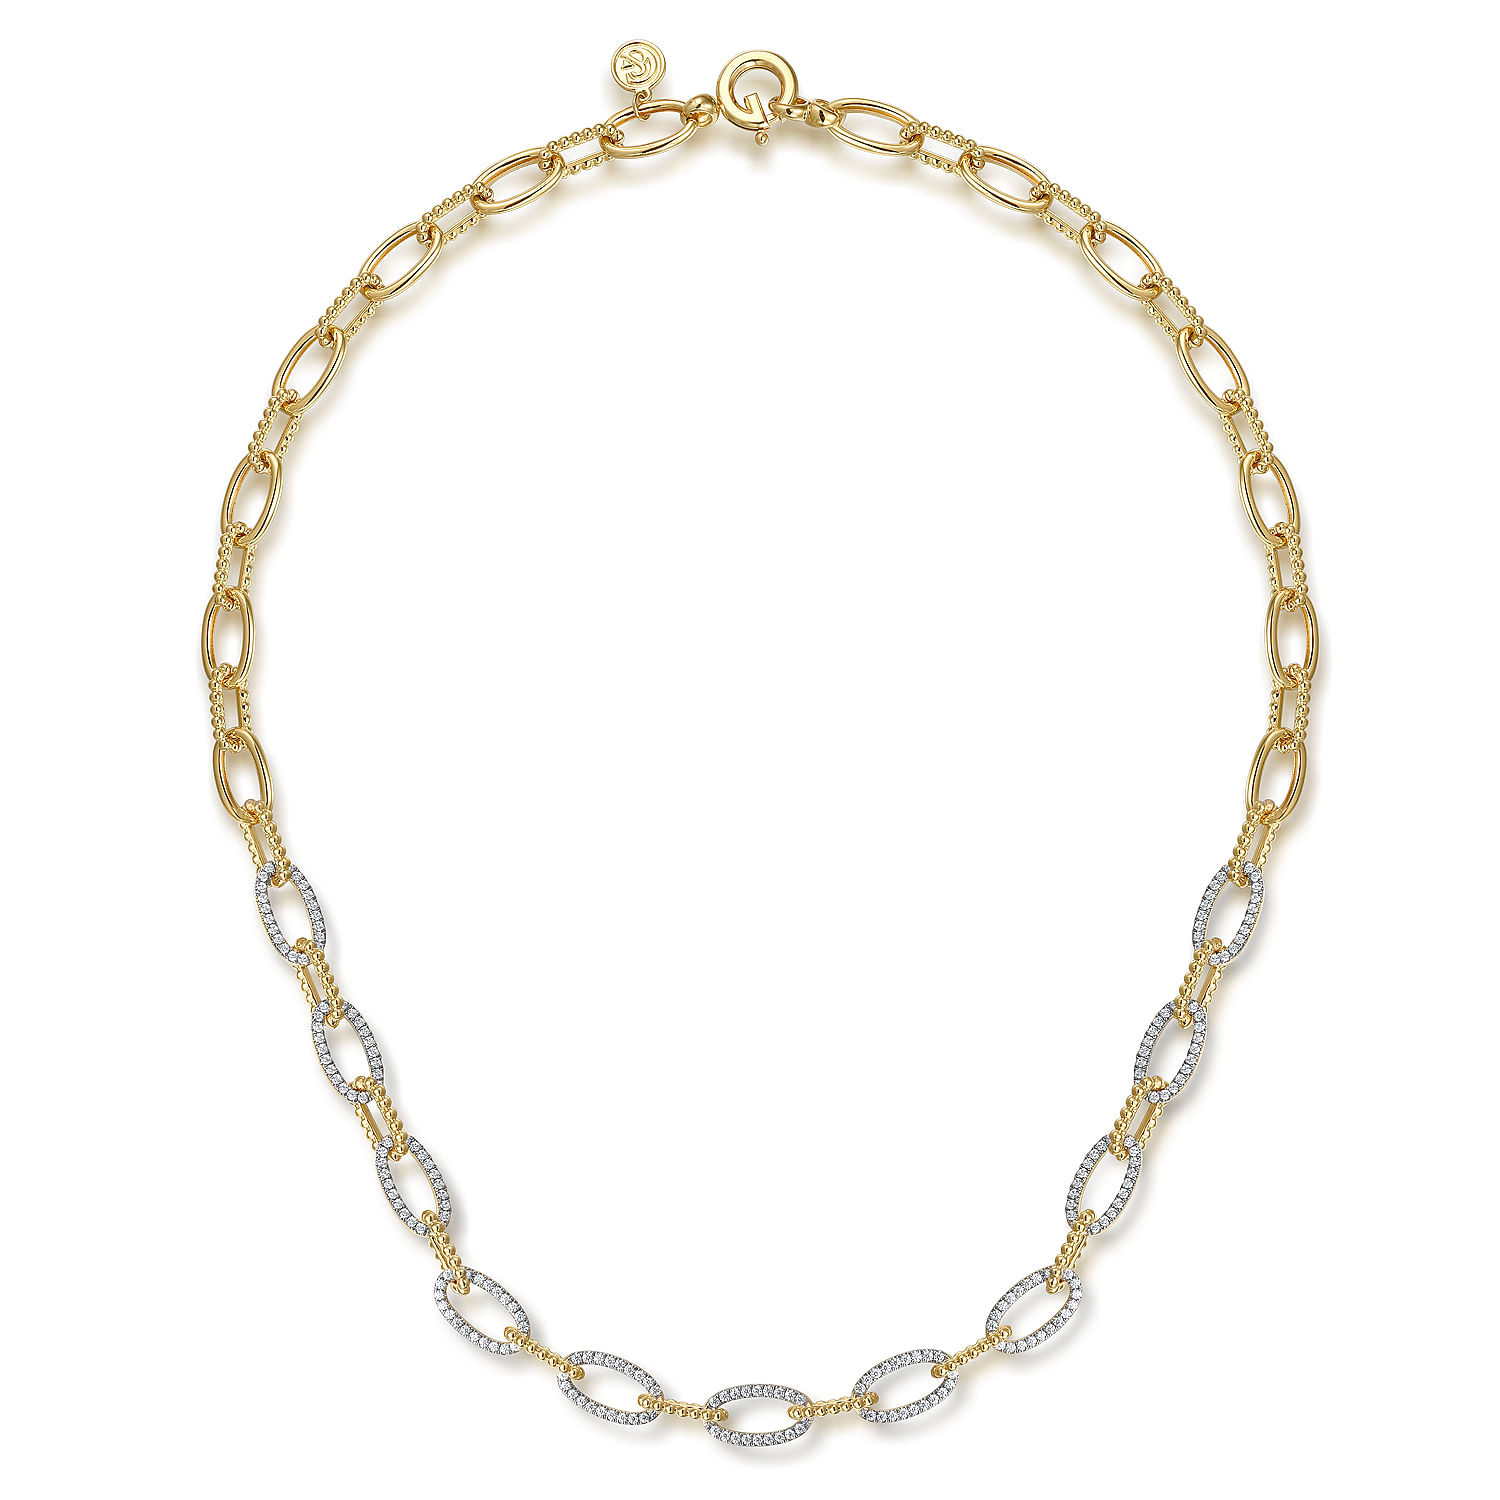 14K Yellow Gold Oval Link Chain Necklace with Pave Diamond Link Stations